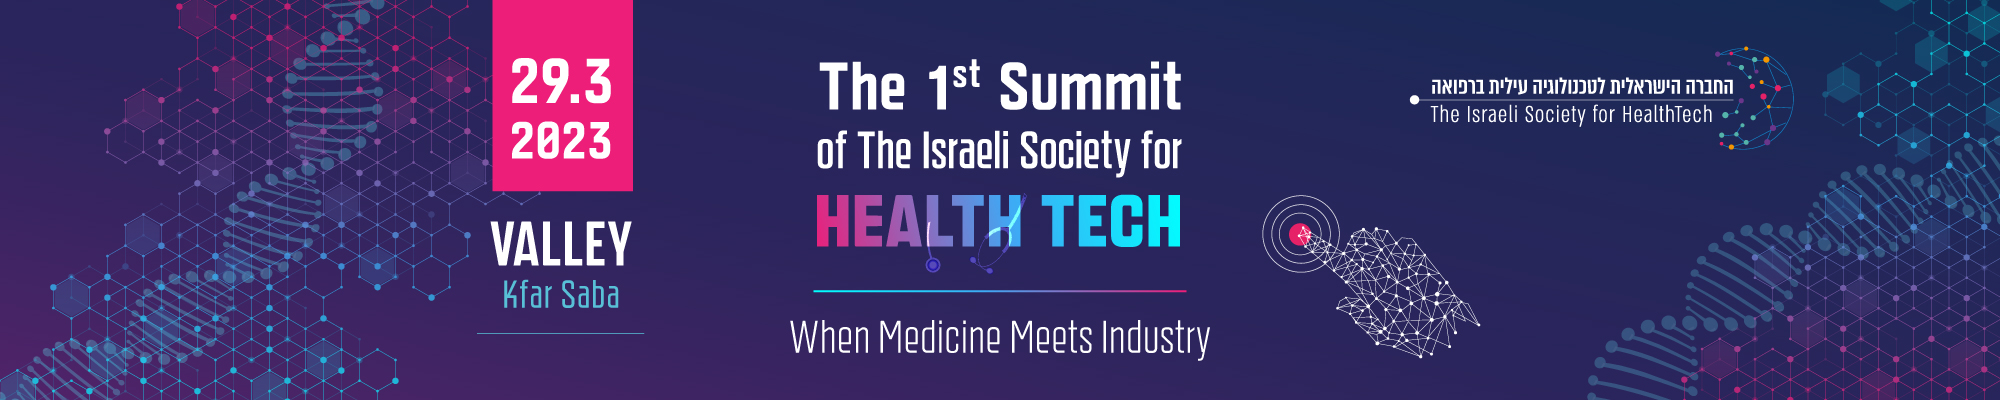 1st Summit of the Israeli Society for HealthTech Inside